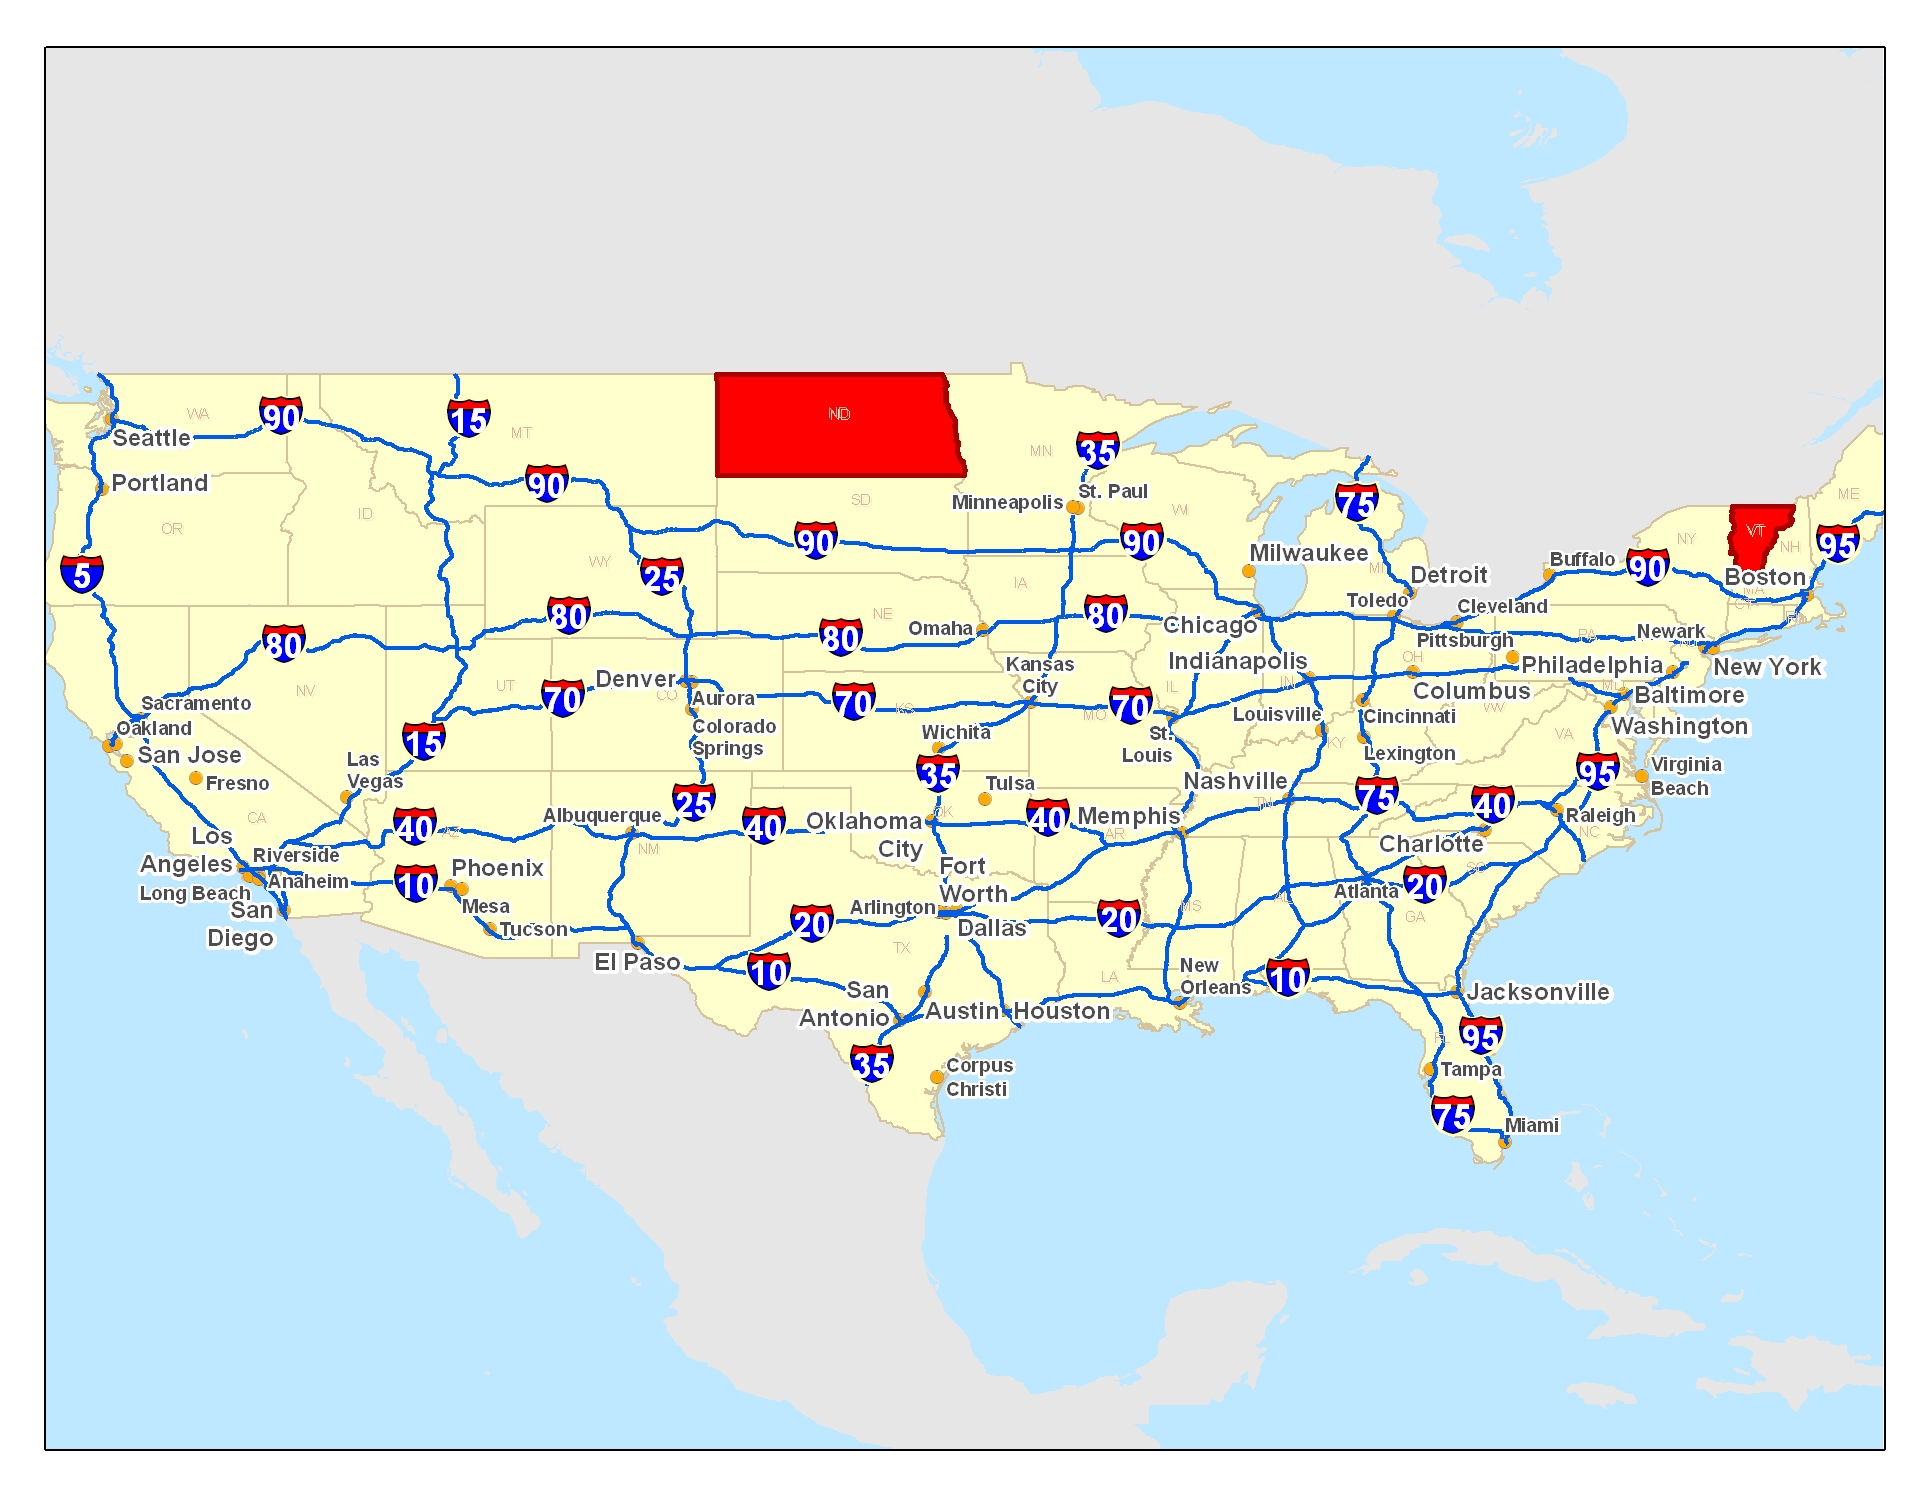 States in which the most significant Interstate highway is not a